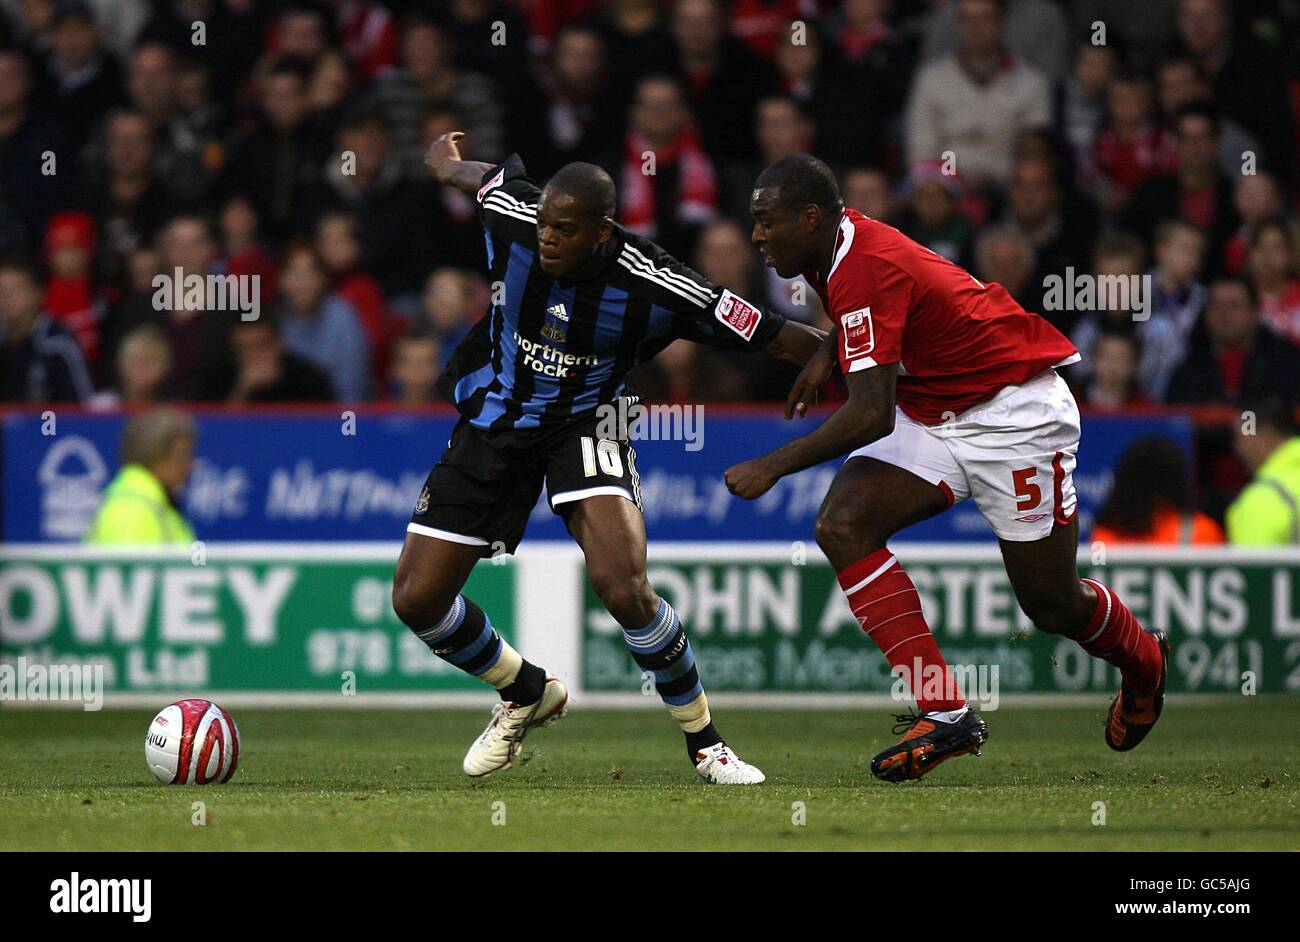 Soccer - Coca-Cola Football League Championship - Nottingham Forest v Newcastle United - City Ground. Newcastle United's Marlon Harewood (left) and Nottingham Forest's Wes Morgan (right) battle for the ball Stock Photo